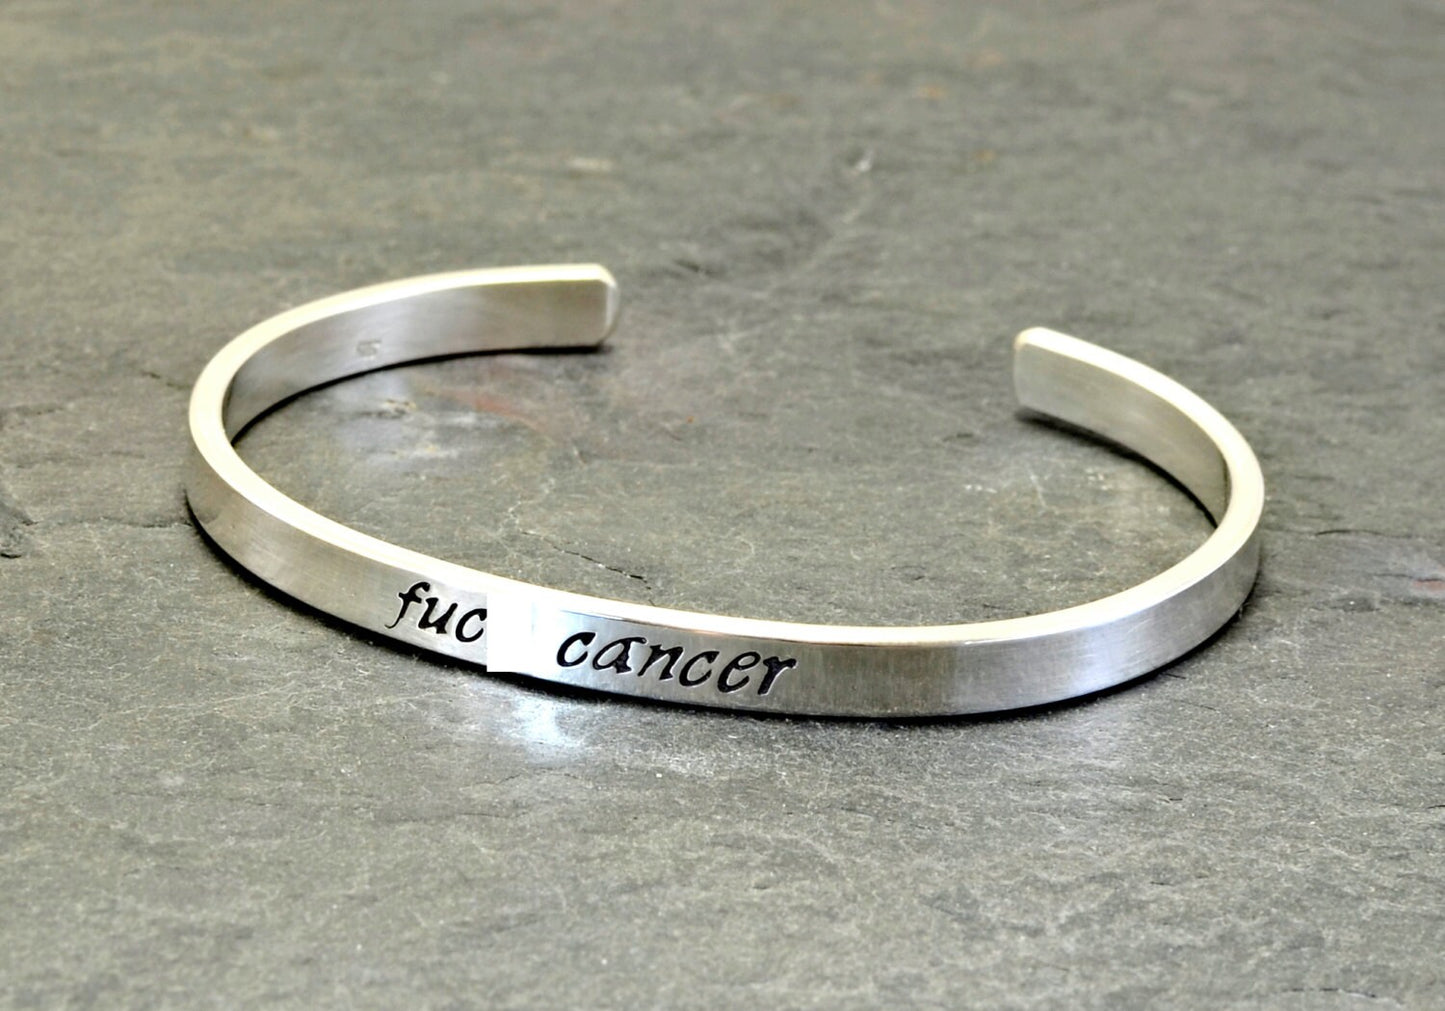 Sterling silver cuff bracelet with f@ck cancer